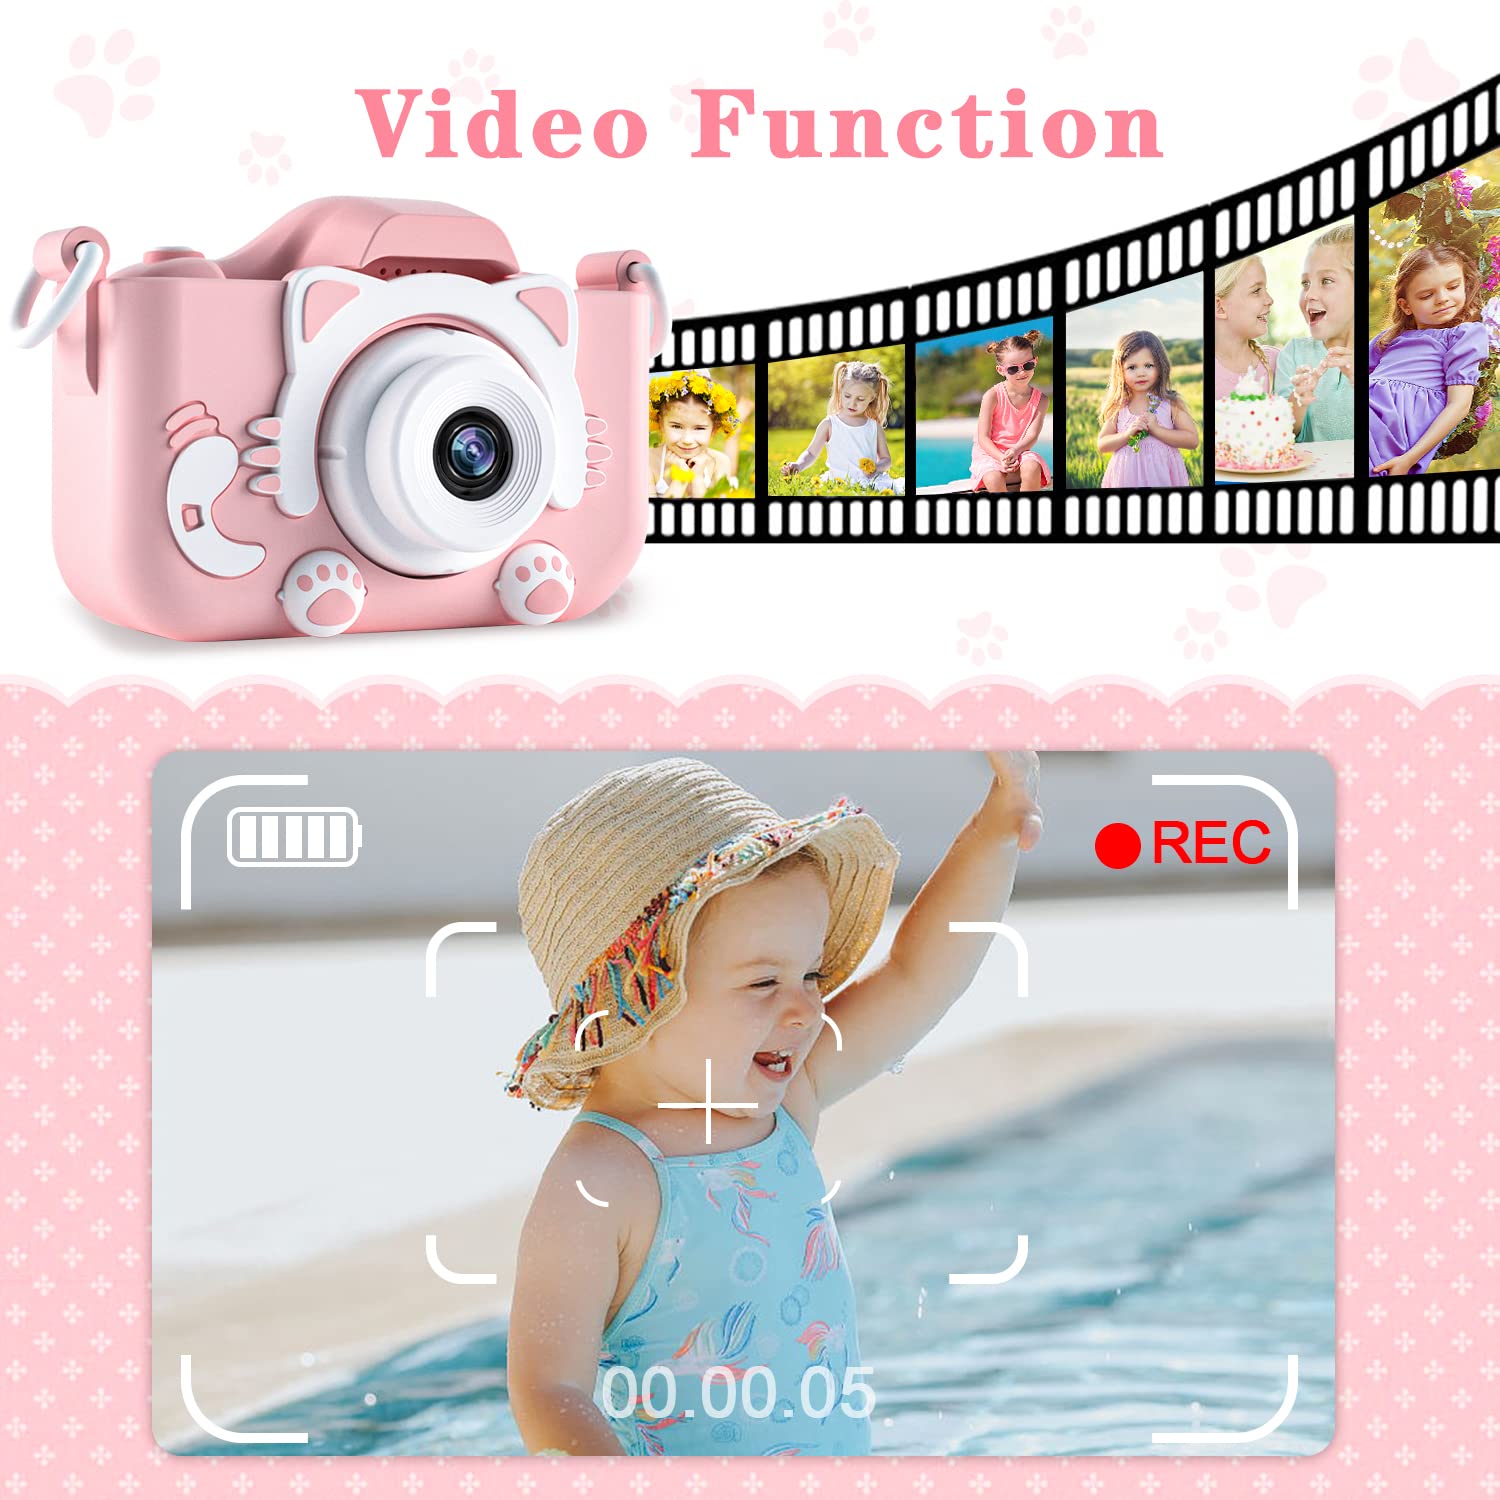 CIMELR Kids Camera Toys for 3-12 Year Old Boys/Girls, Kids Digital Camera for Toddler with 1080P Video, Chritmas Birthday Festival Gifts for Kids, Selfie Camera for Kids, 32GB SD Card(Pink)